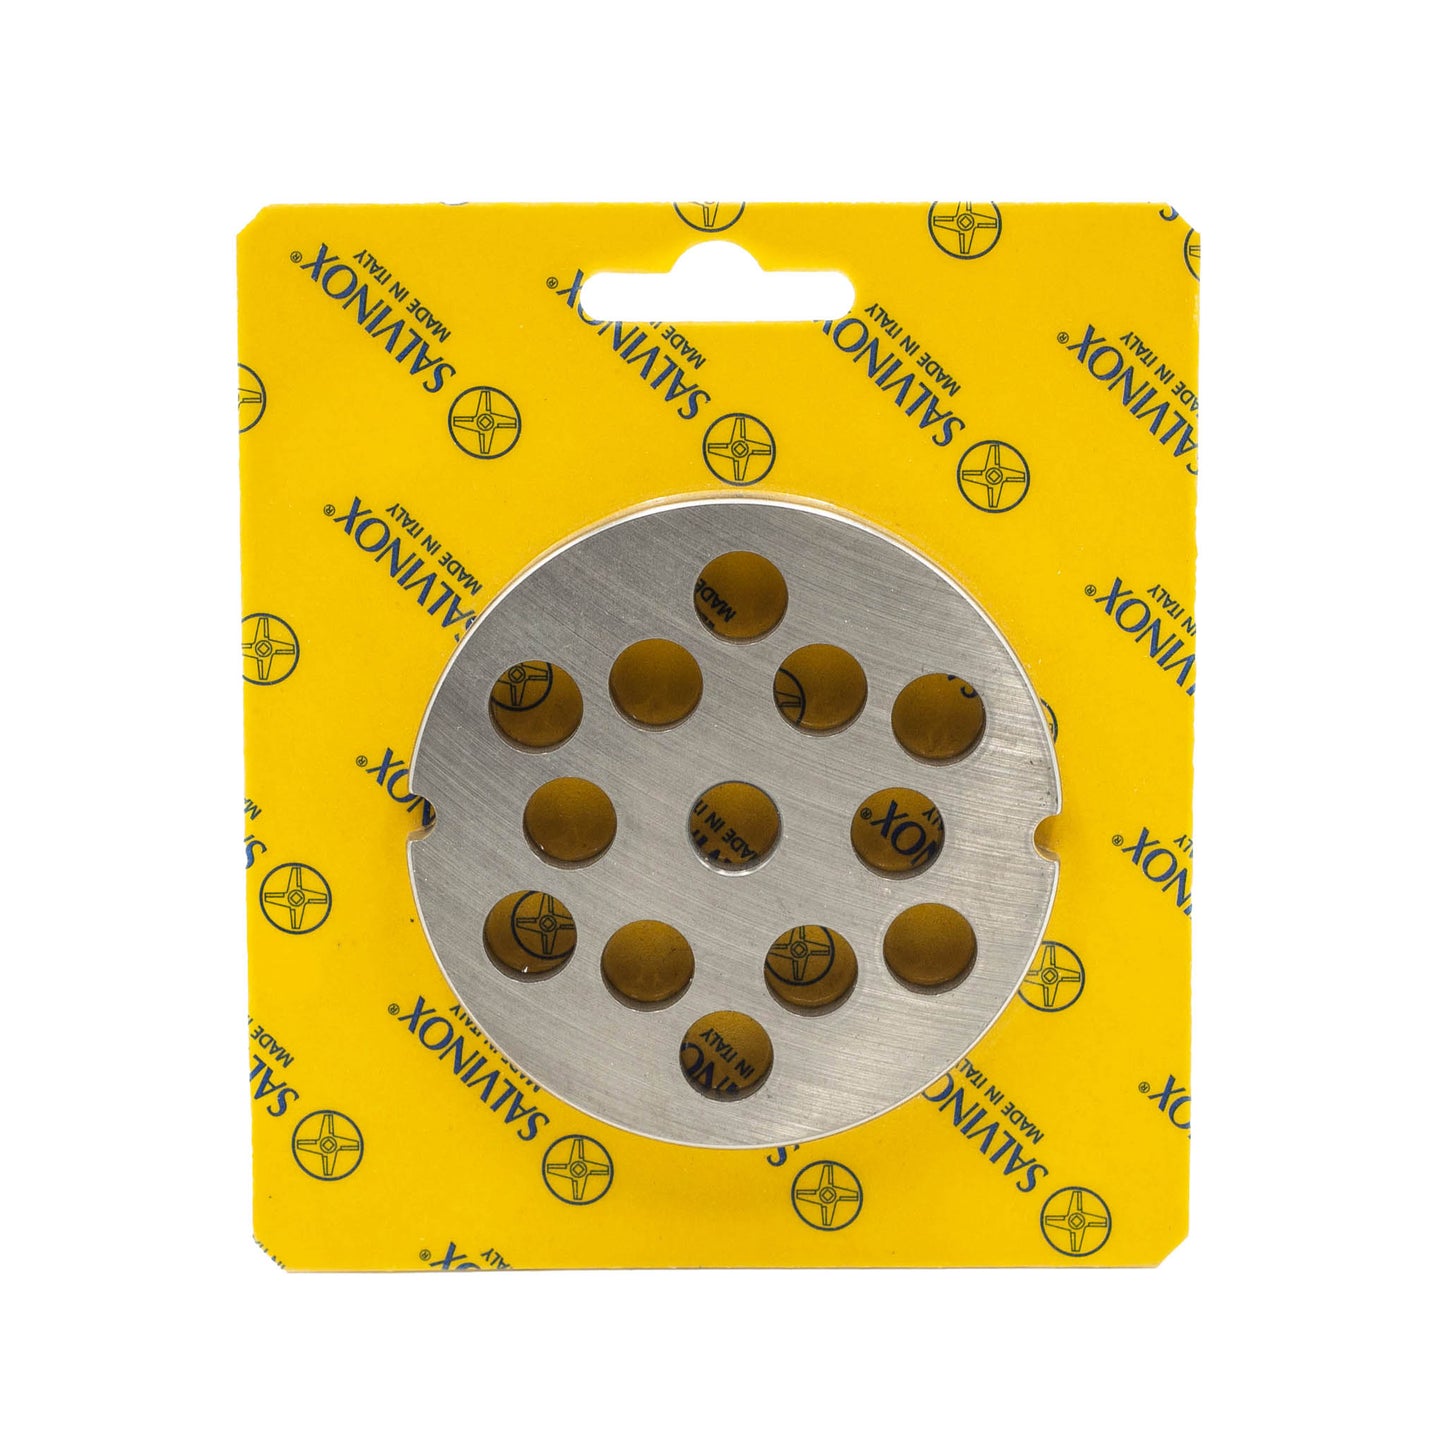 Size 22 with 12mm holes stainless steel replacement mincer plate for salami and sausage mincing machines. 